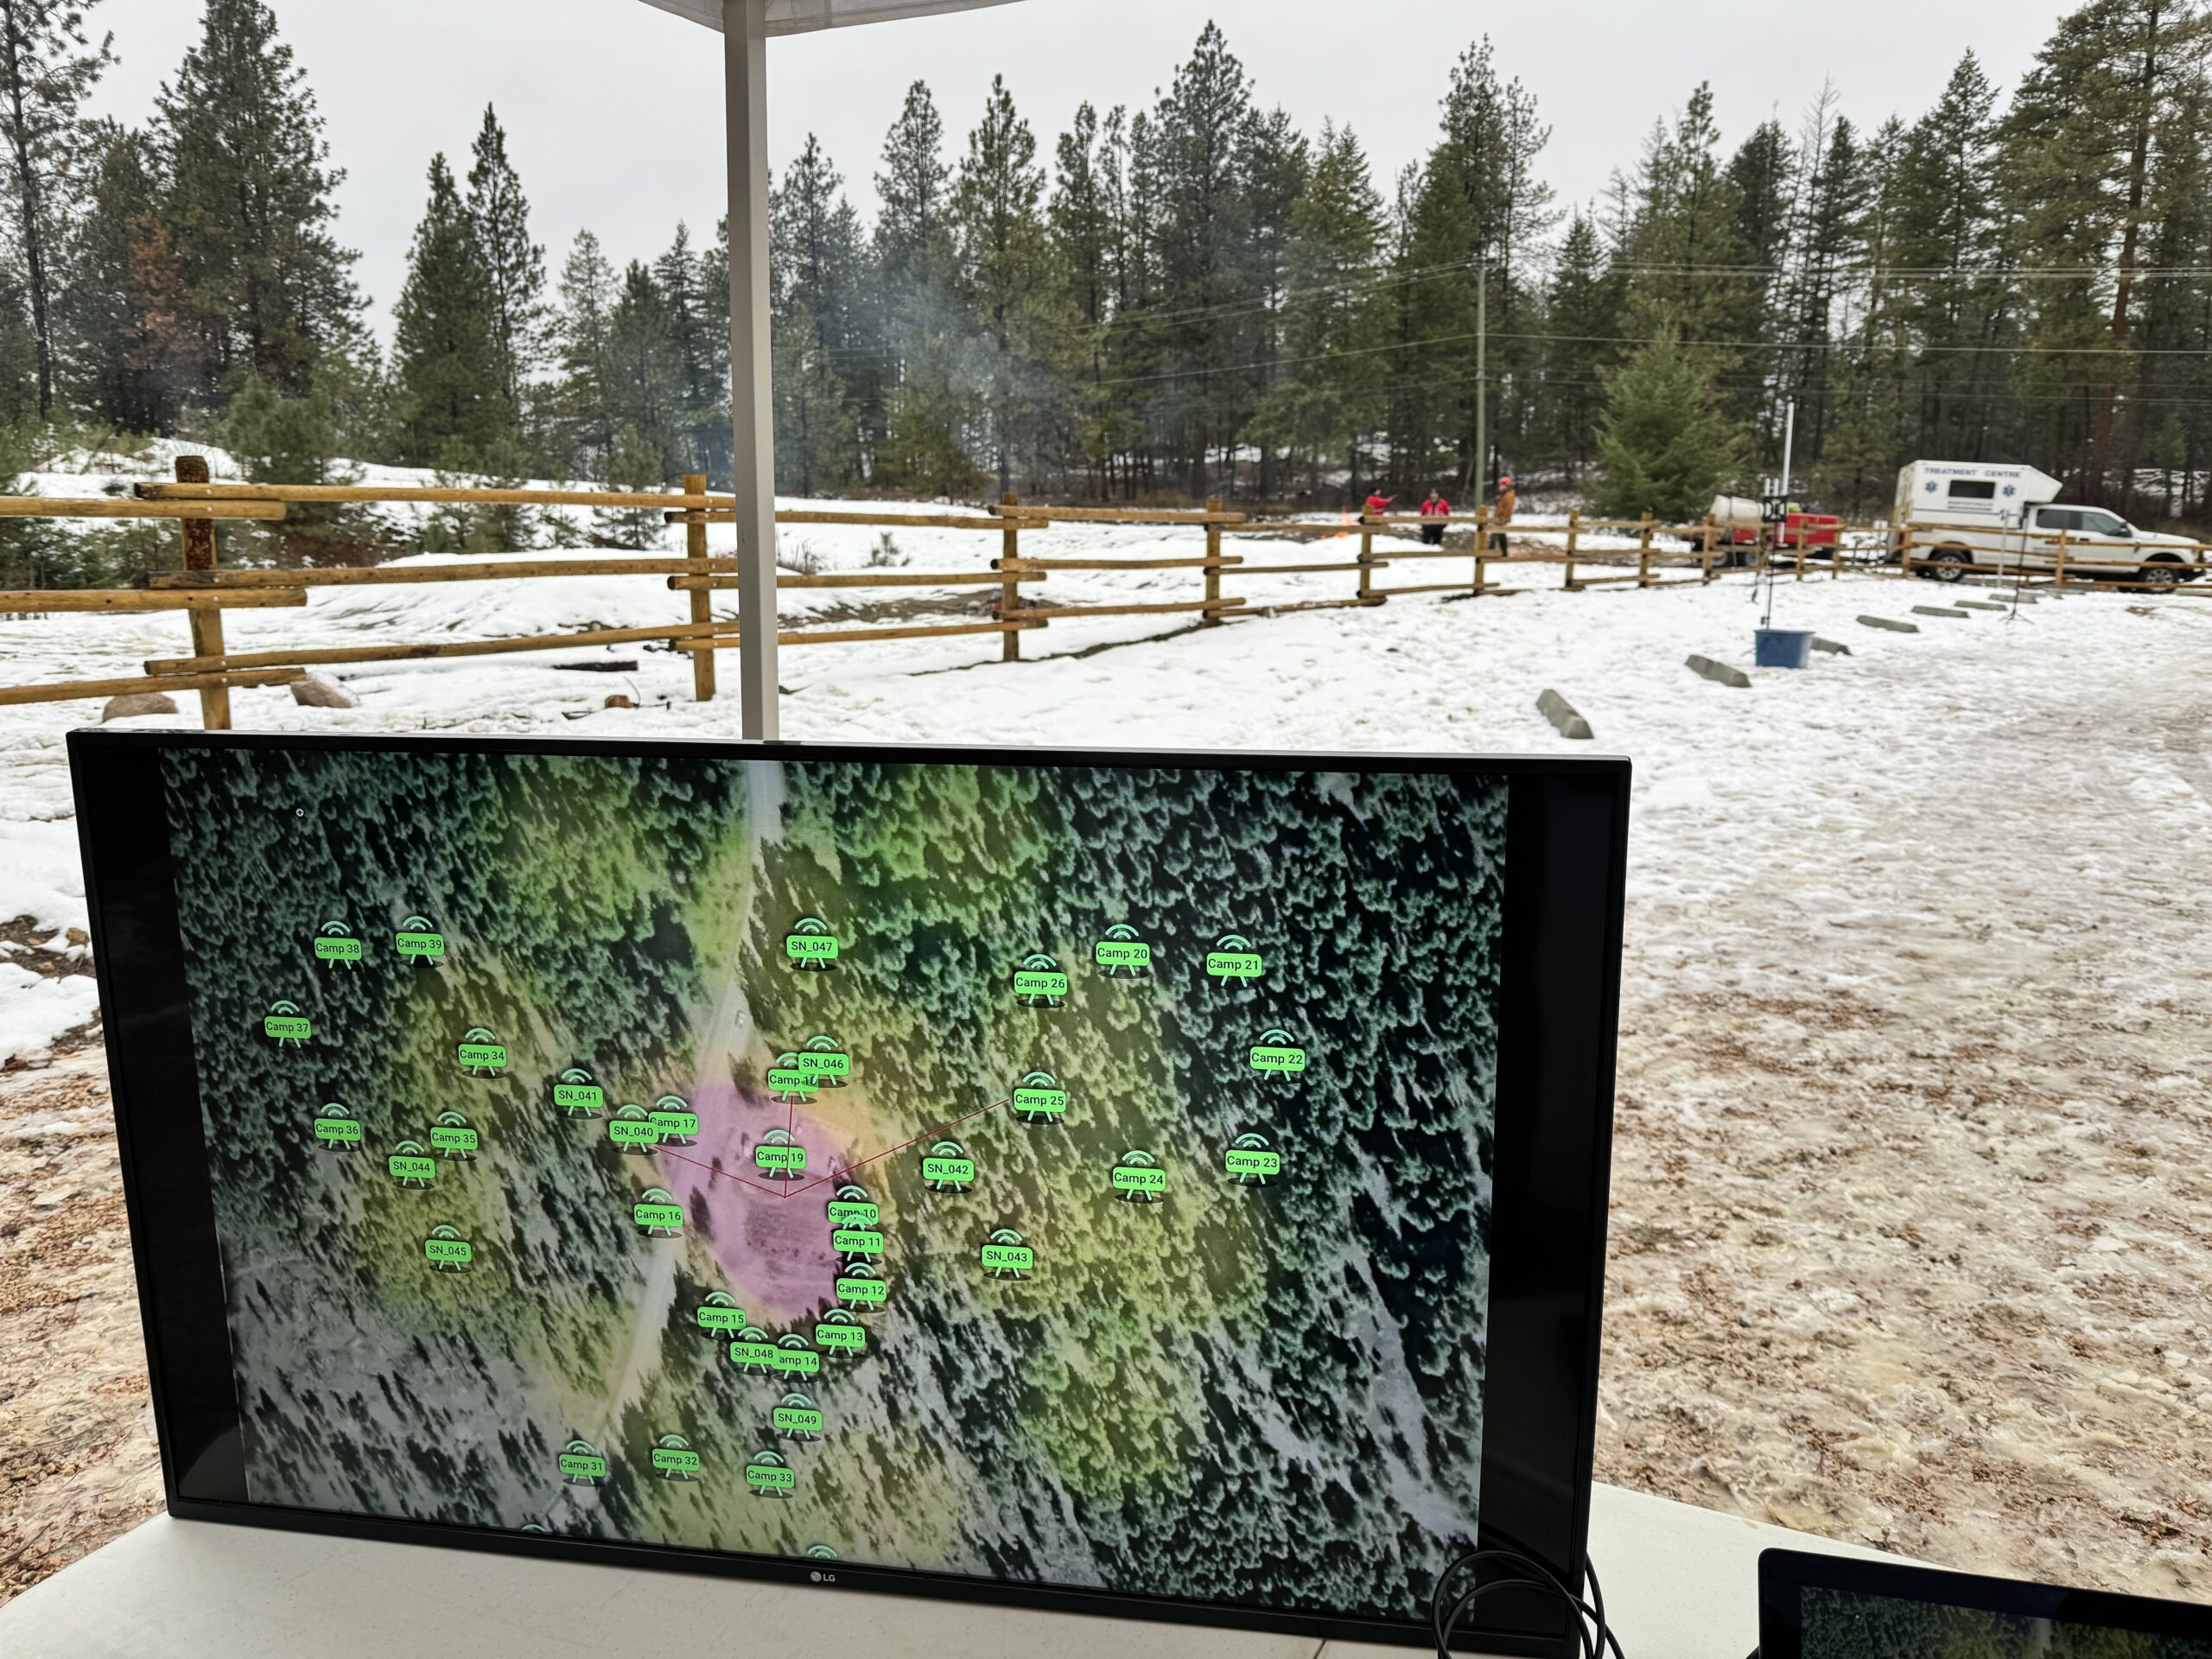 Innovative wildfire solutions on display as SenseNet's FireWard system undergoes live demonstration, highlighting its early detection and accuracy in diverse environments.